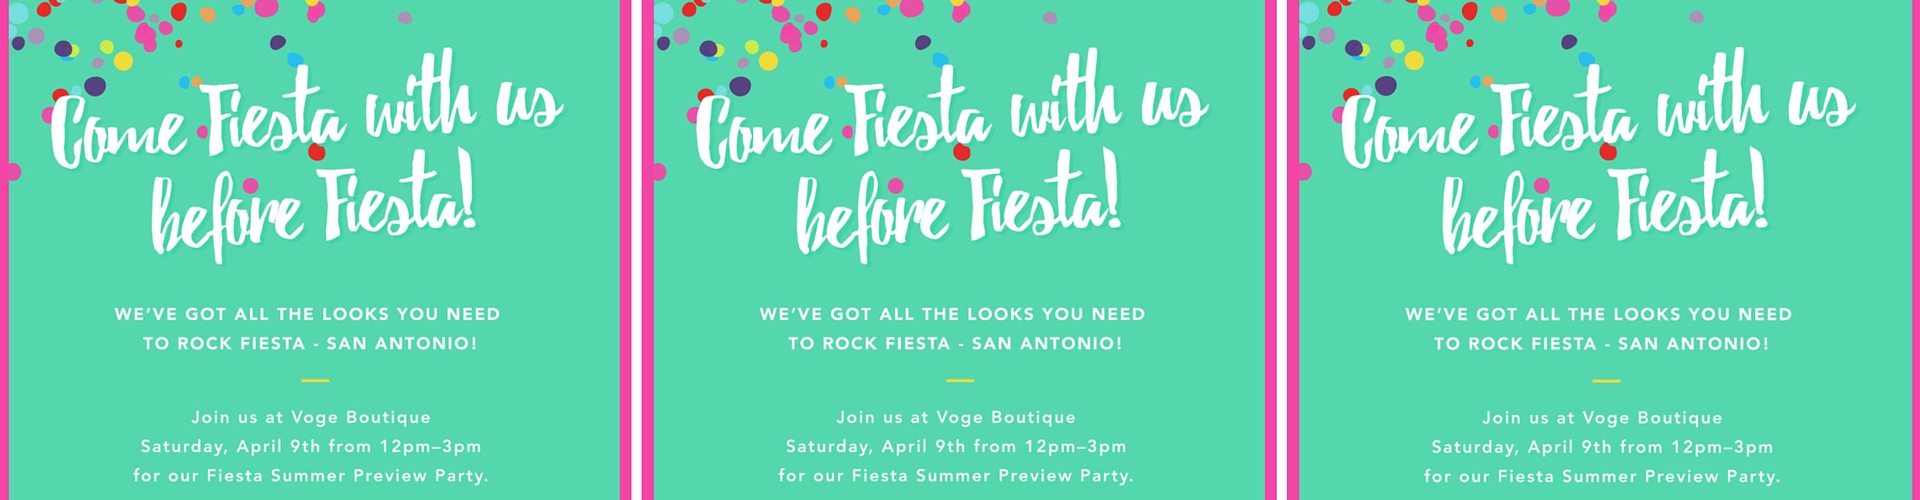 Come FIESTA with me at Voge Boutique!